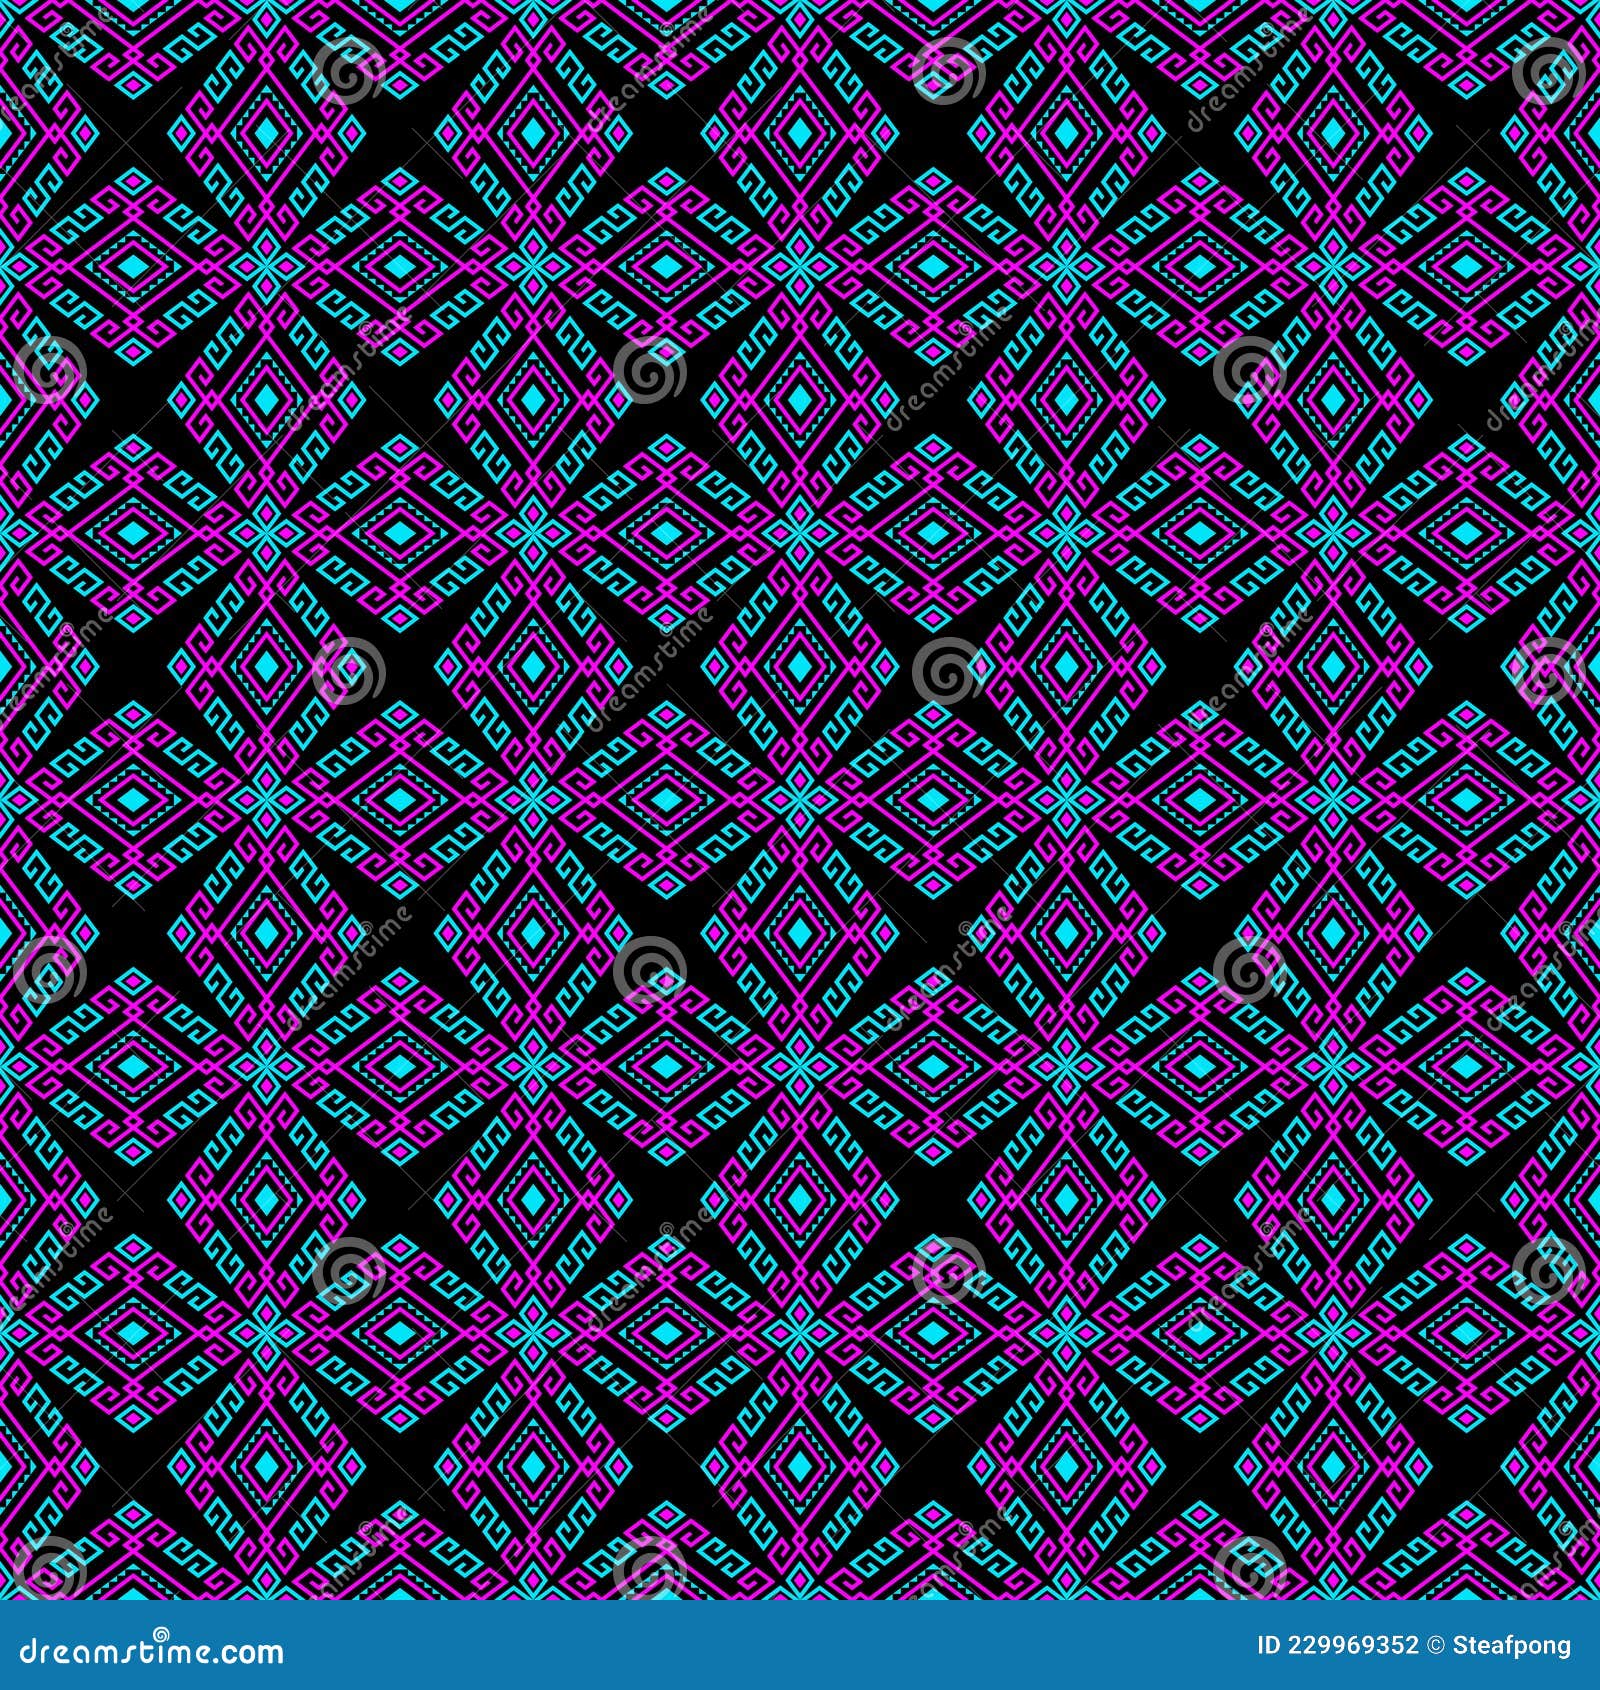 Magenta Turquoise Symmetry Geometric Tribal or Native Seamless Pattern on  Black Background Stock Vector - Illustration of abstract, geometric:  229969352